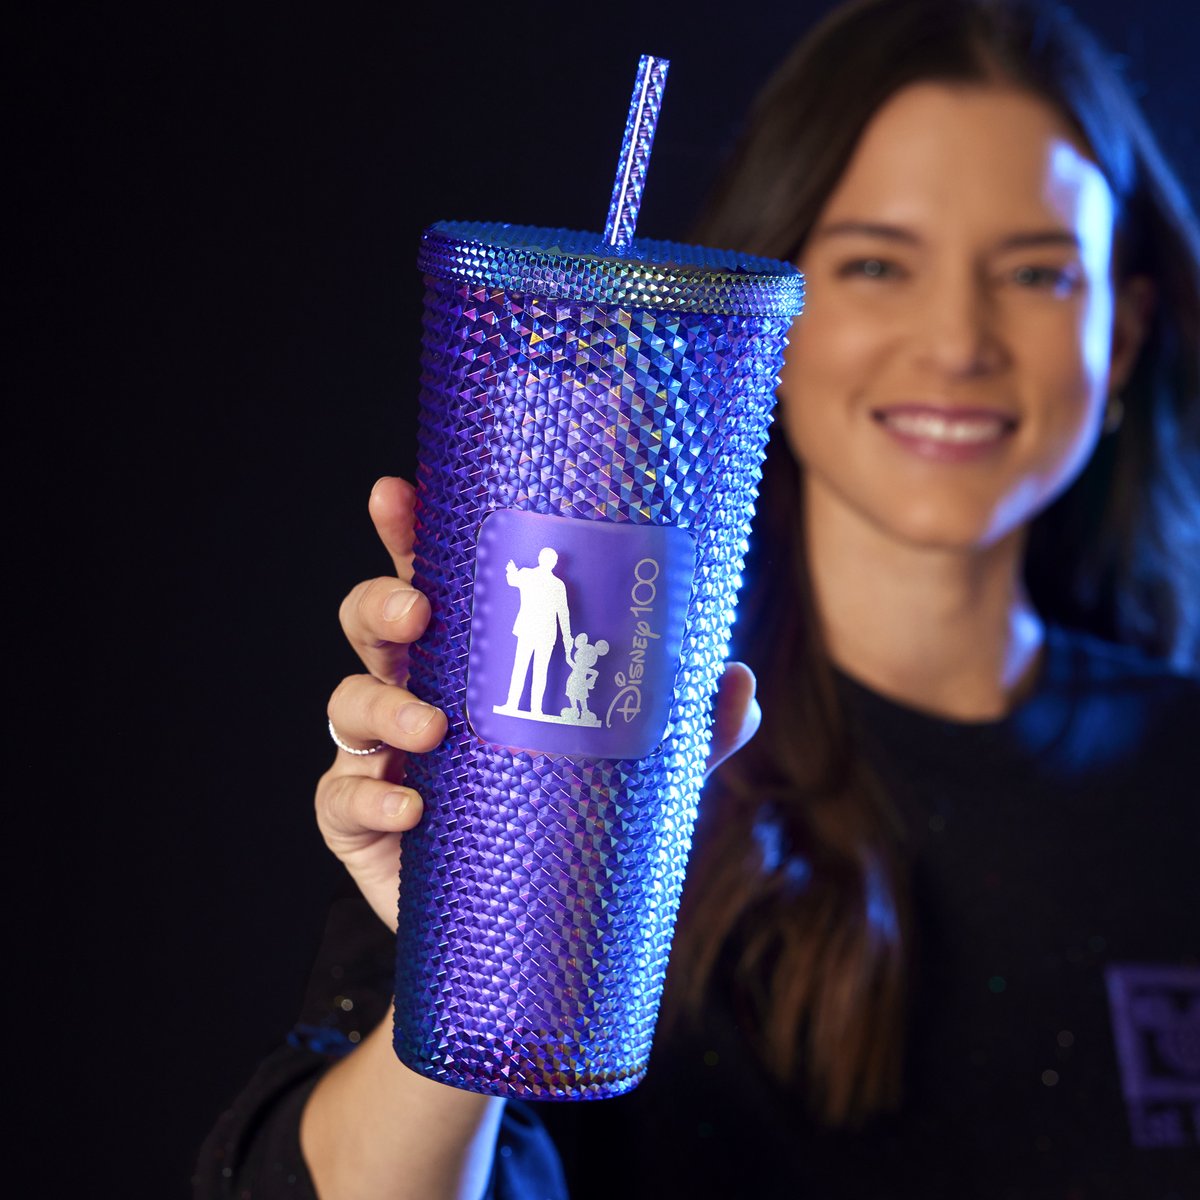 Hold onto special memories every time you pick up Starbucks® Tumbler inspired by the #Disney100 Platinum Celebration Finale. di.sn/6018uteWs